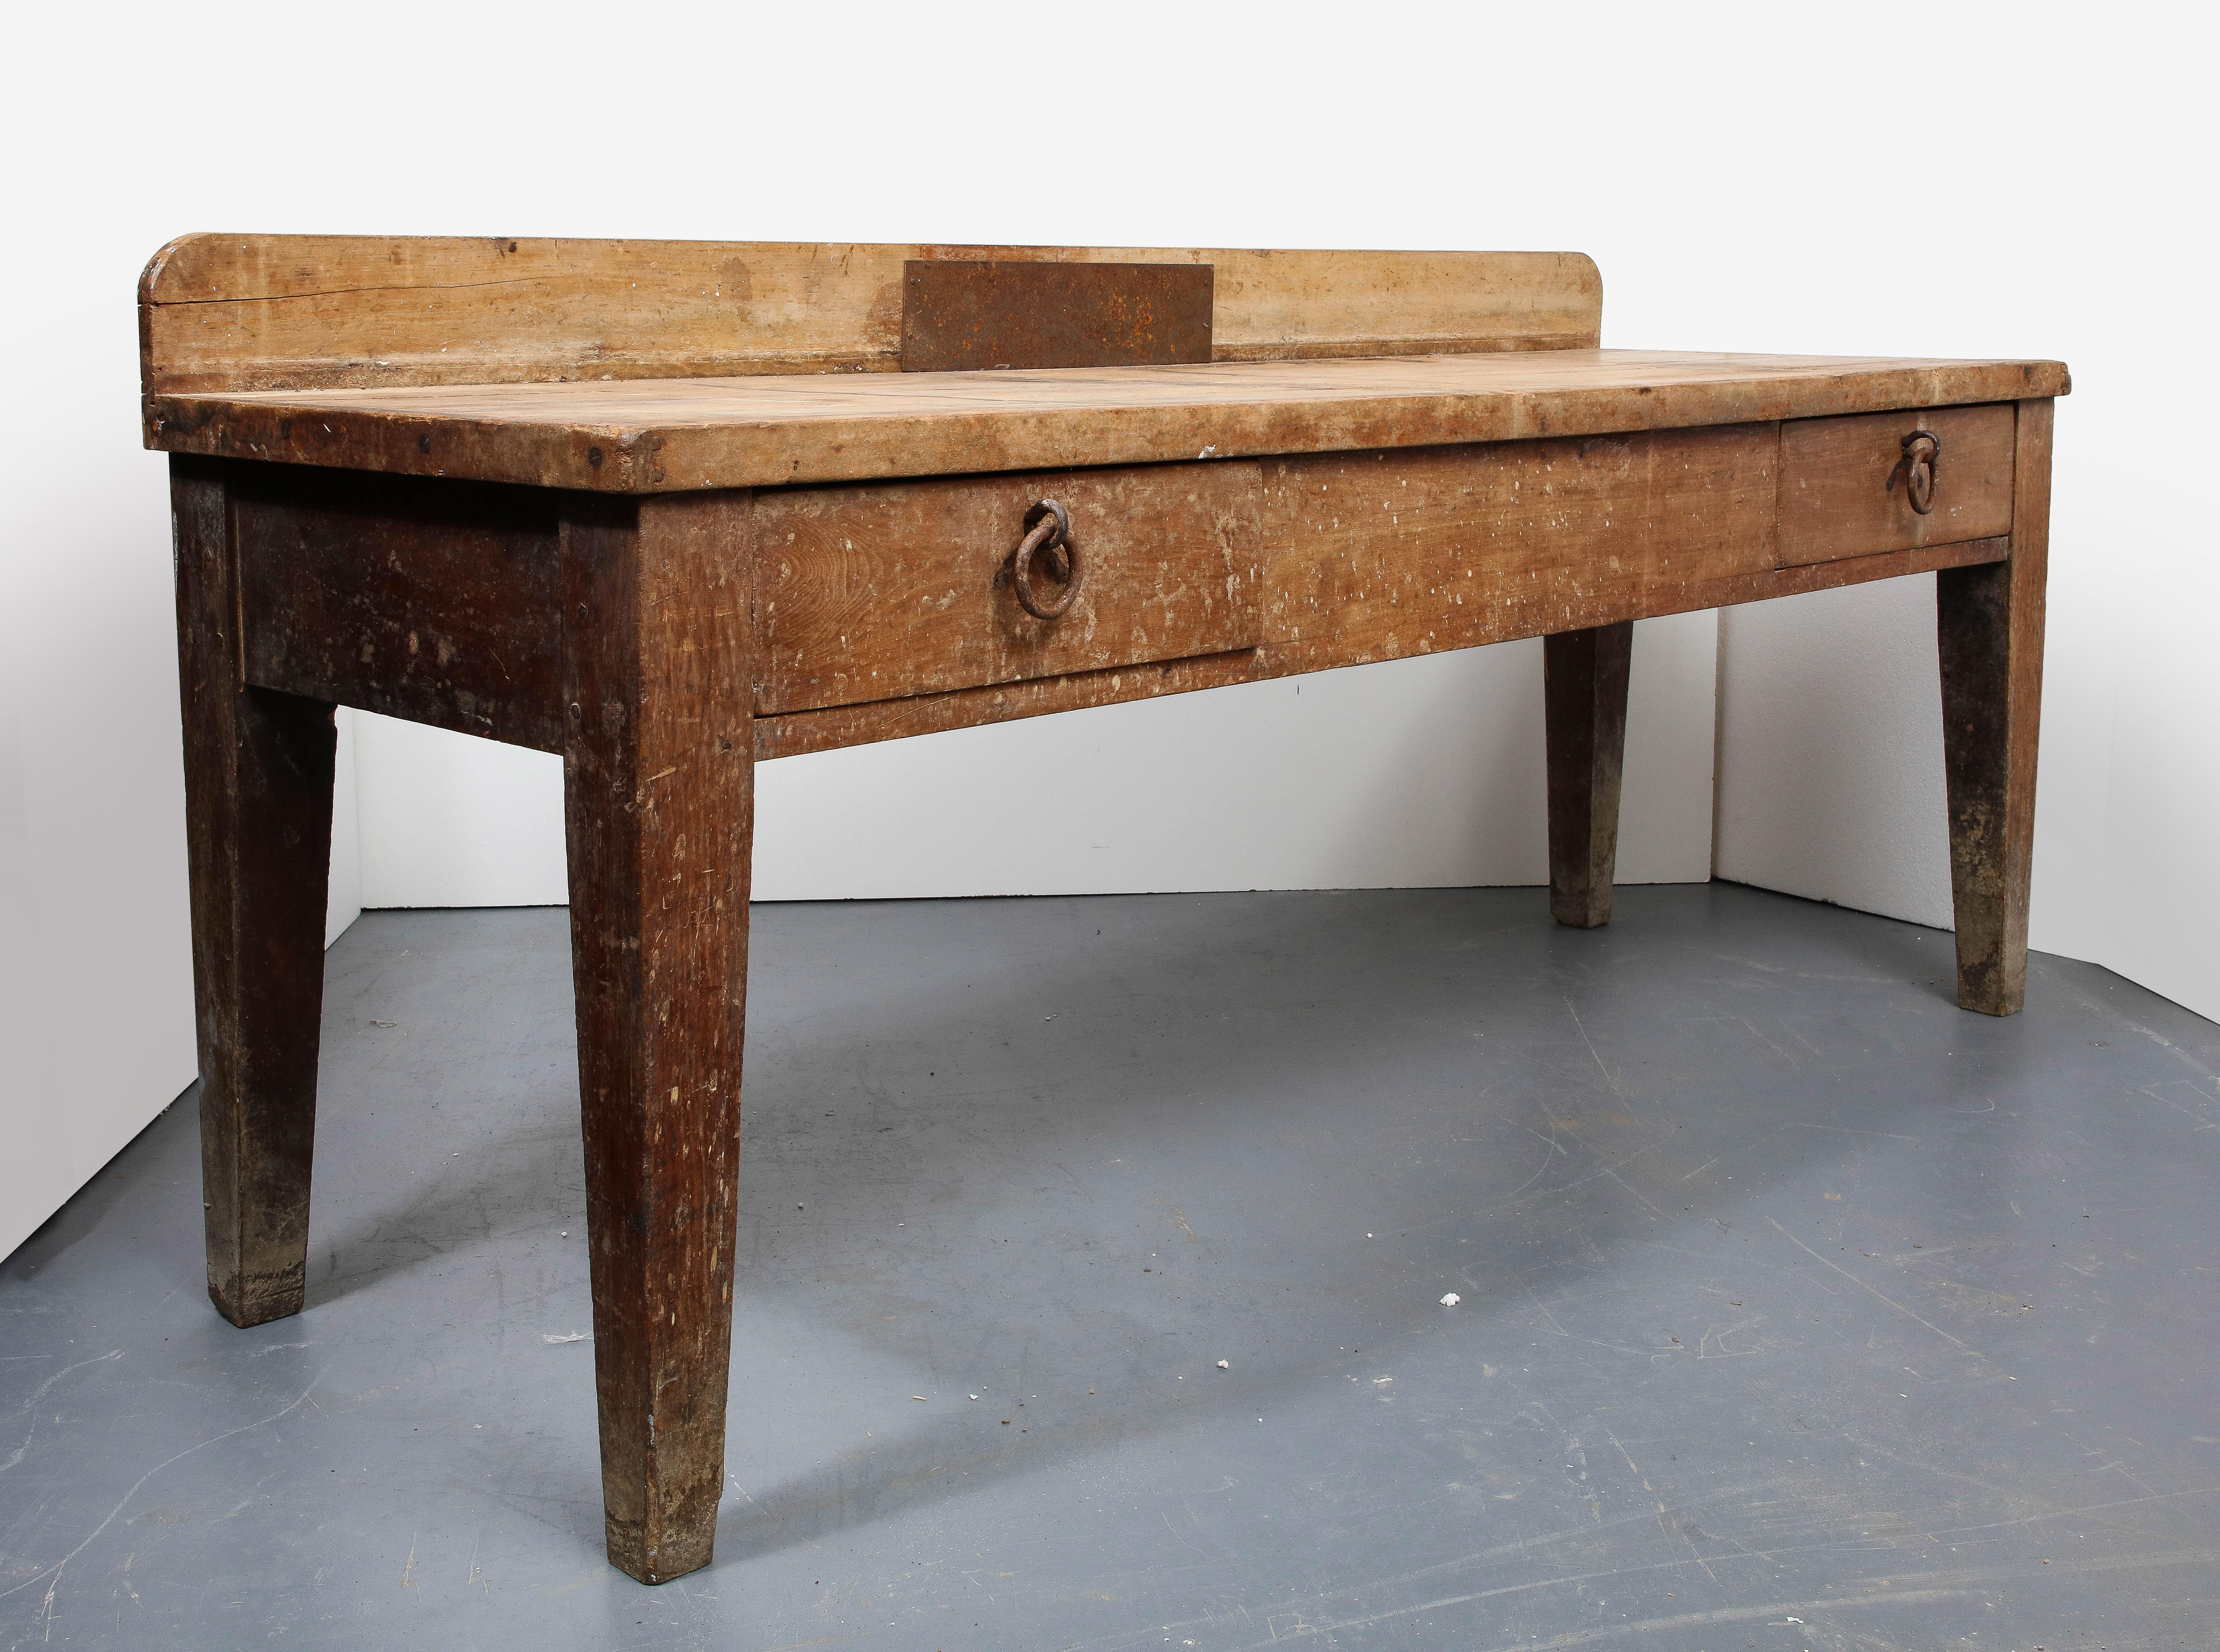 Large rustic work table, France, 19th Century 

This rustic work table consists of an oak plank construction, original iron hardware, and a stunning antique patina. 

The table is highly stable and structurally sound with scratches and wear